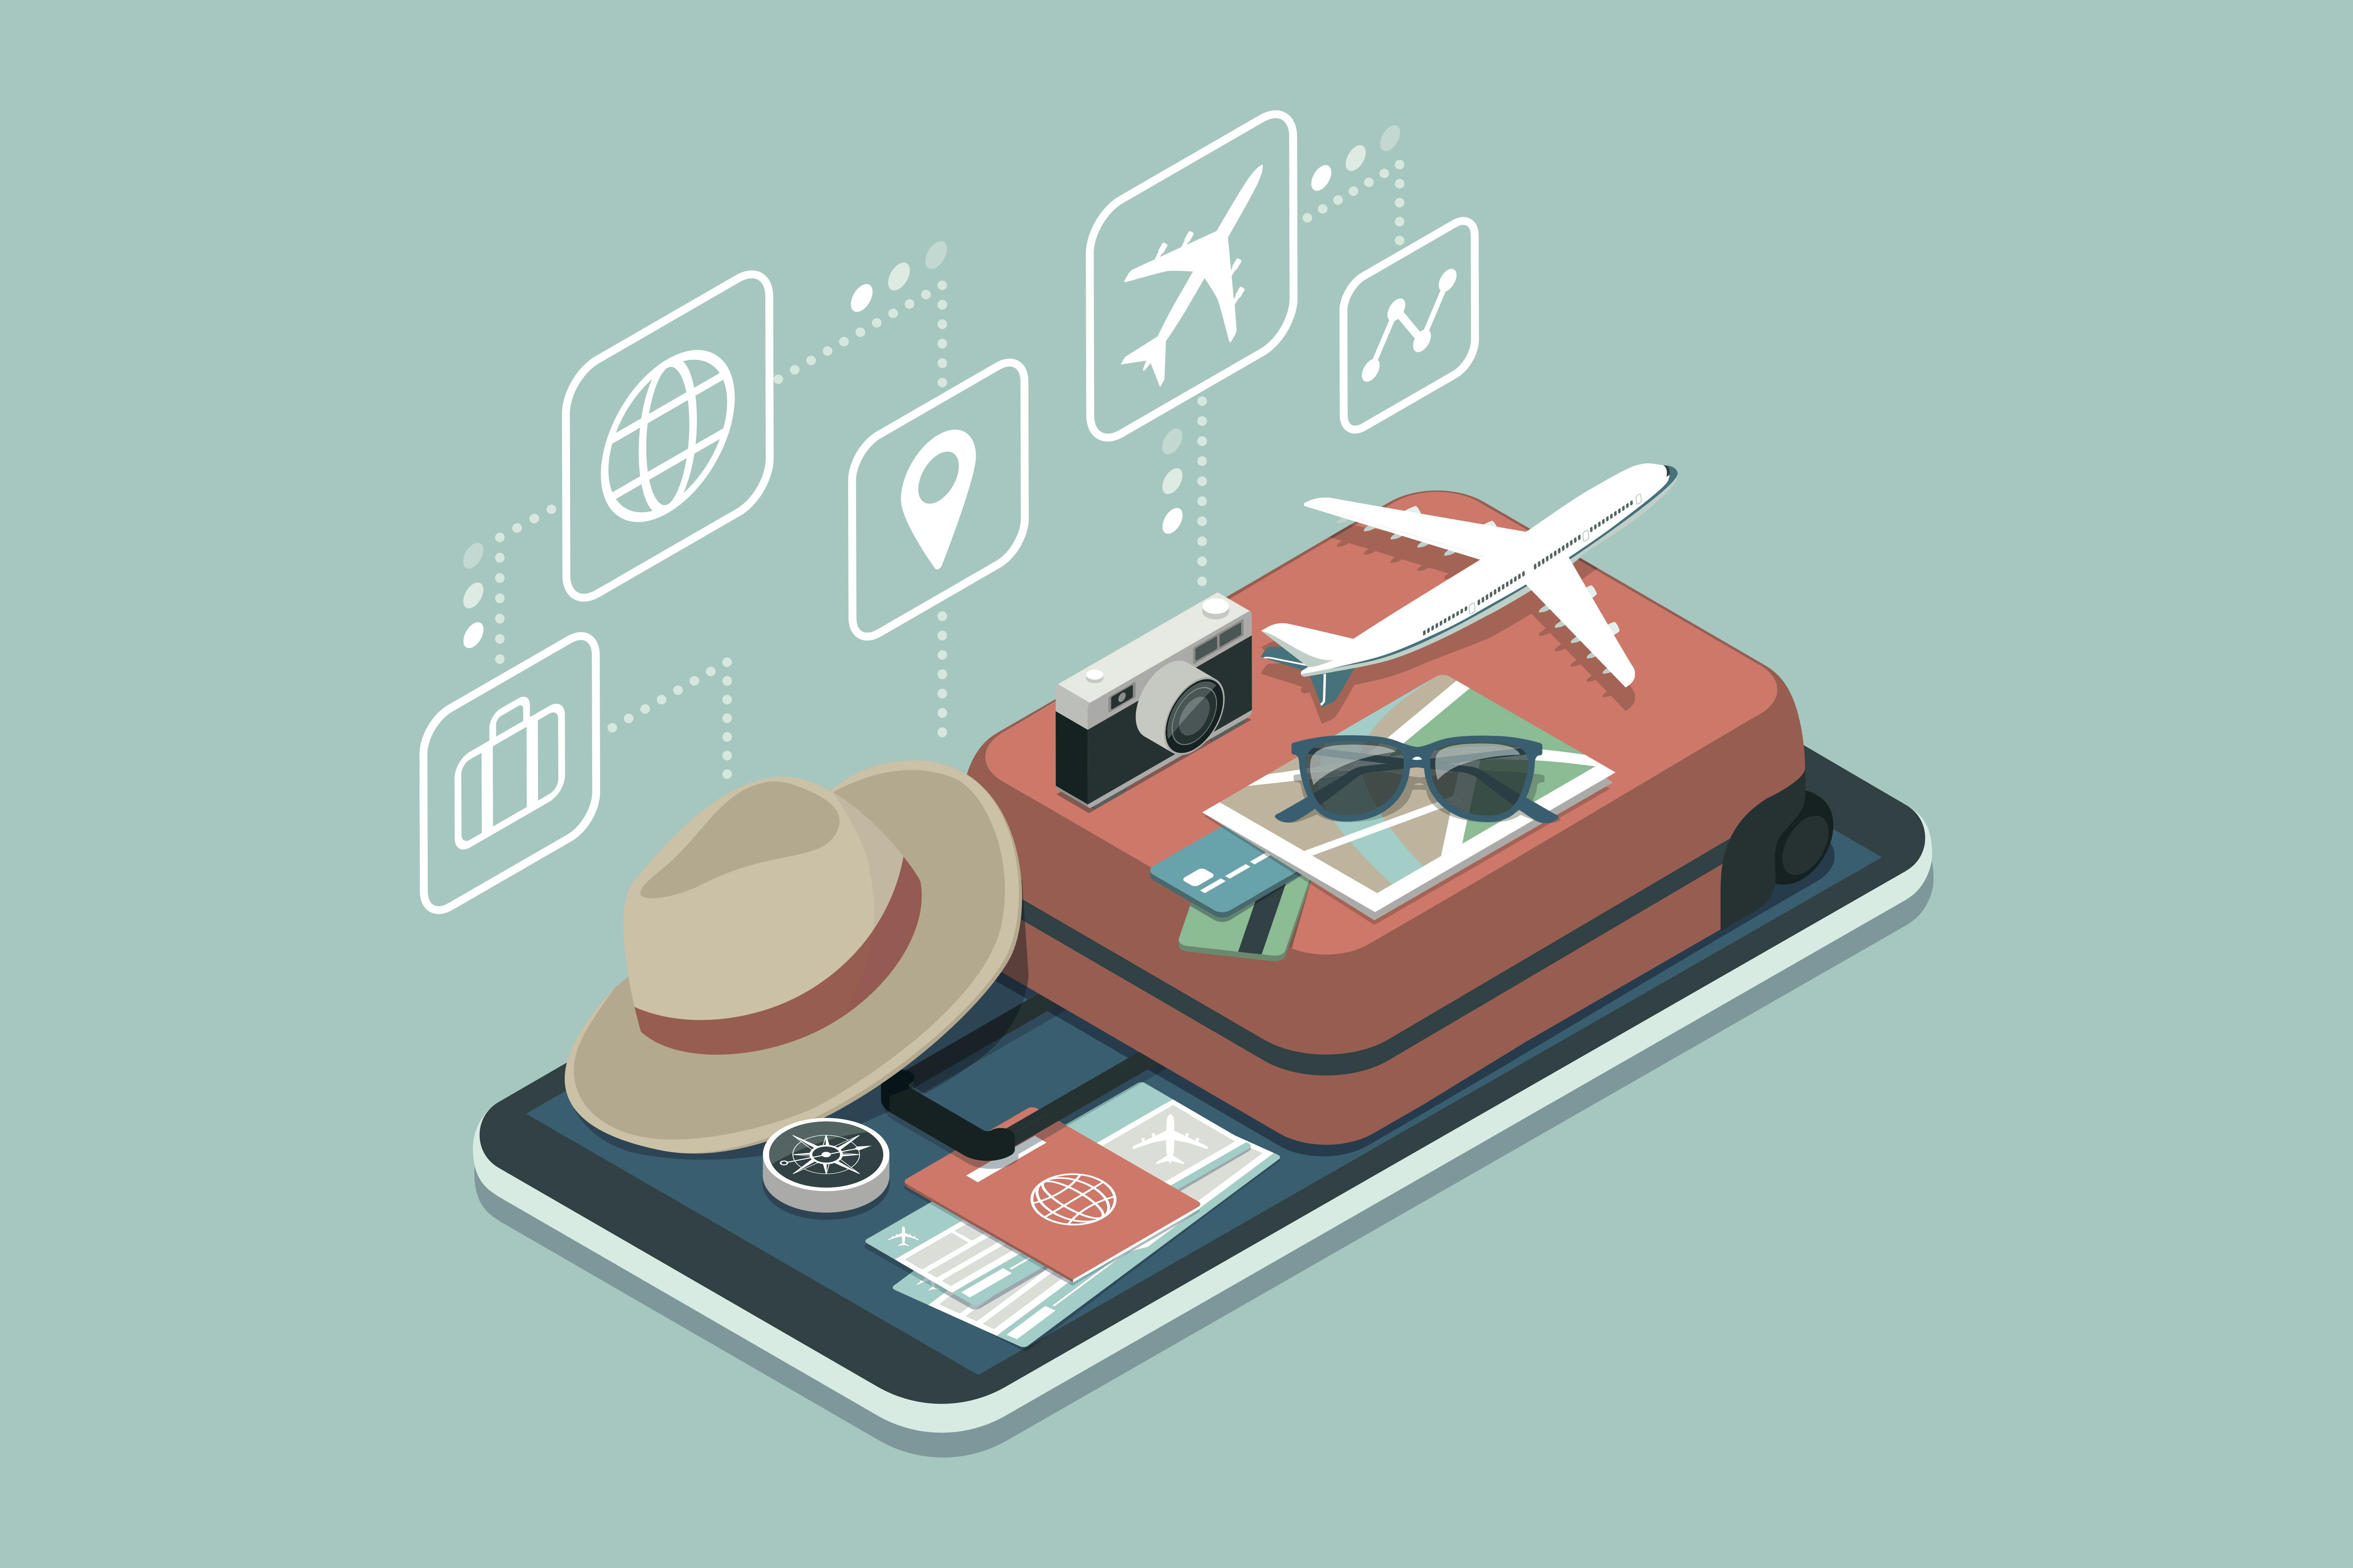 An illustration of a suitcase along with a passport, hat, camera, sunglasses and model aeroplane.